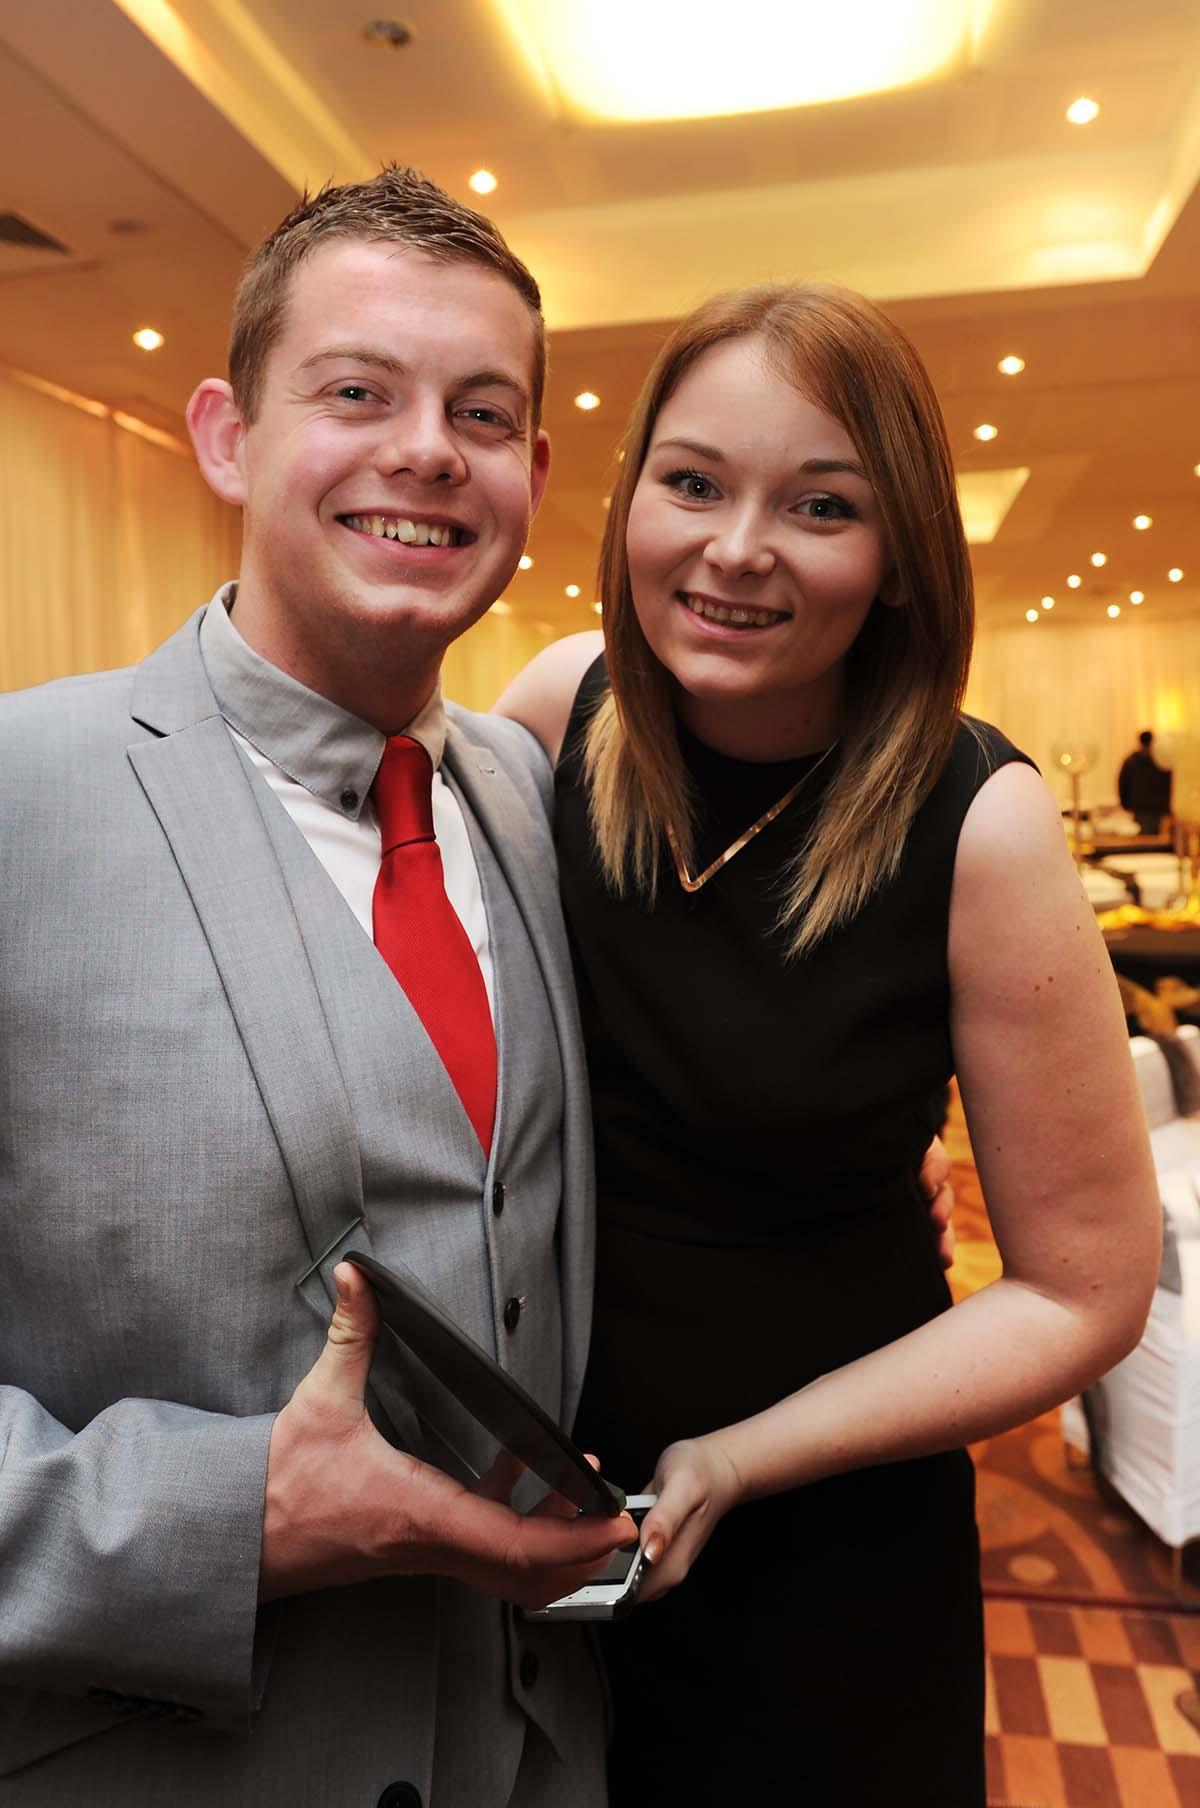  Sportsman of the Year, Daniel Rivers, who won a gold medal at the Commonwealth Games 2014 for 50m Rifle and bronze in the 20m Air Rifle. He is pictured here with his partner Vicky Campbell.